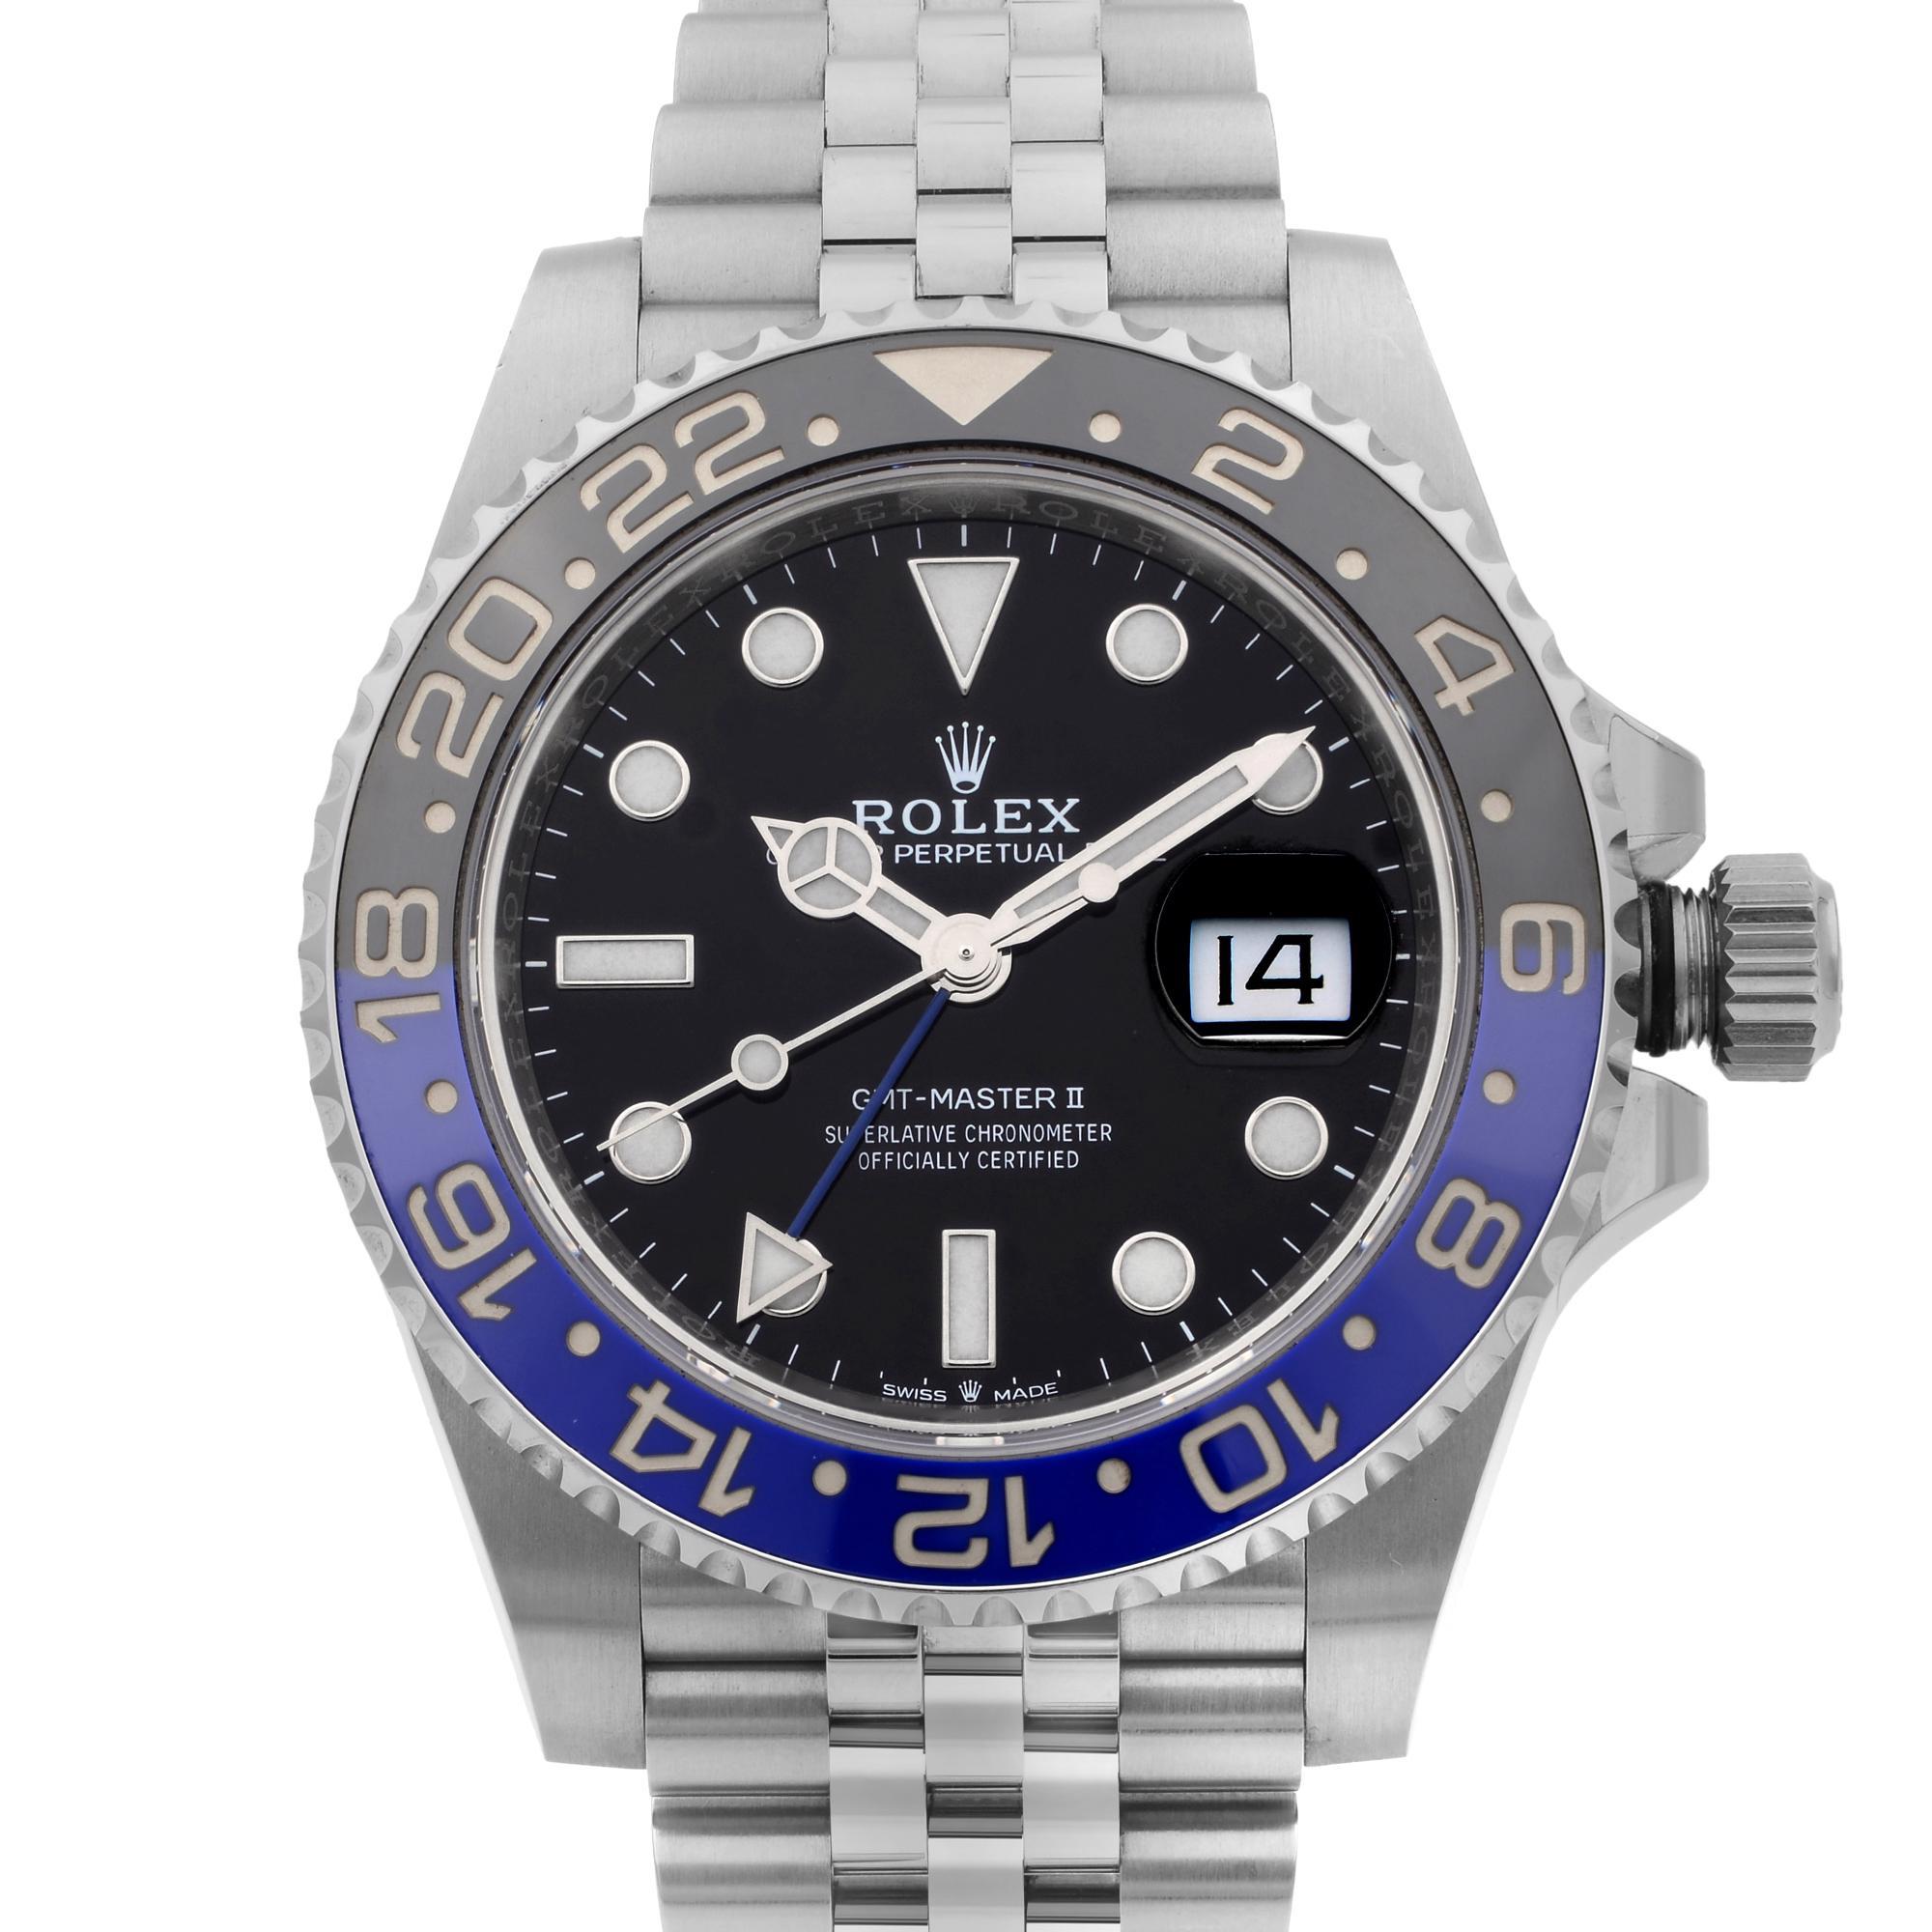 Unworn GMT-Master II Batgirl 126710BLNR. 2021 card. Comes with the manufacturer's box and papers. Covered by 3-year Chronostore Warranty.
Details:

Brand Rolex
Type Wristwatch
Department Men
Model Number 126710BLNR
Country/Region of Manufacture